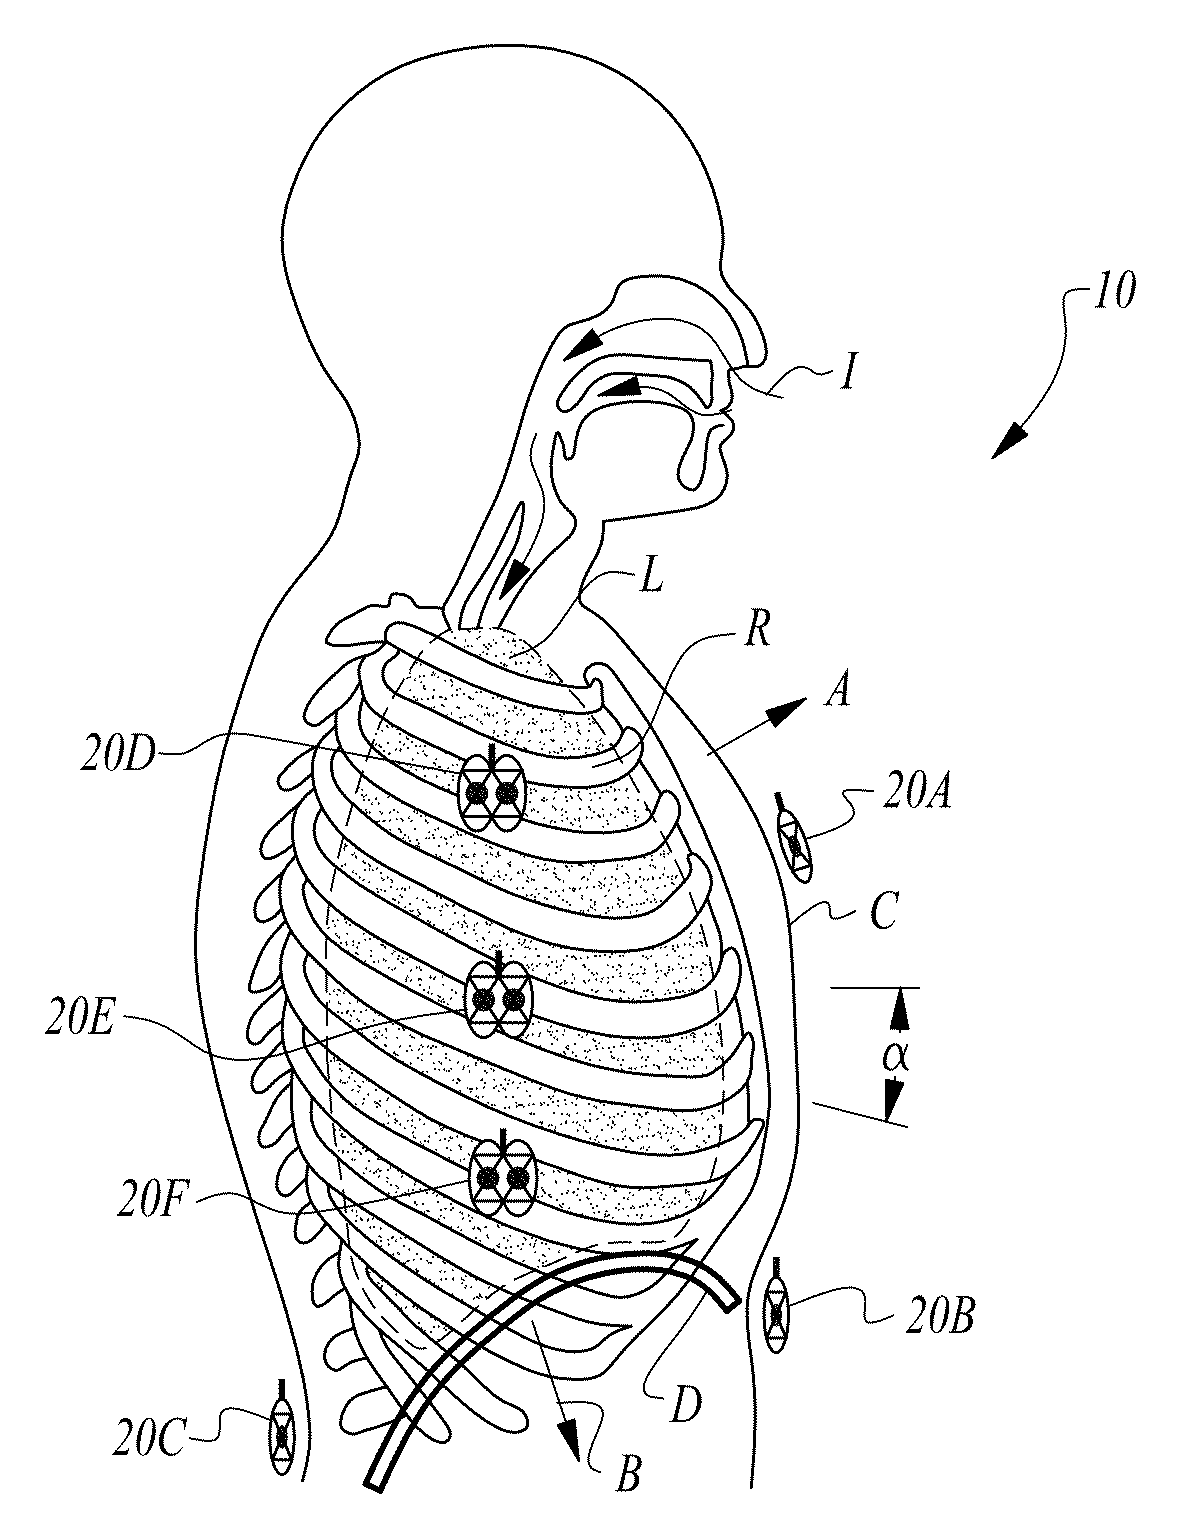 Apparatus and method for continuous noninvasive measurement of respiratory function and events